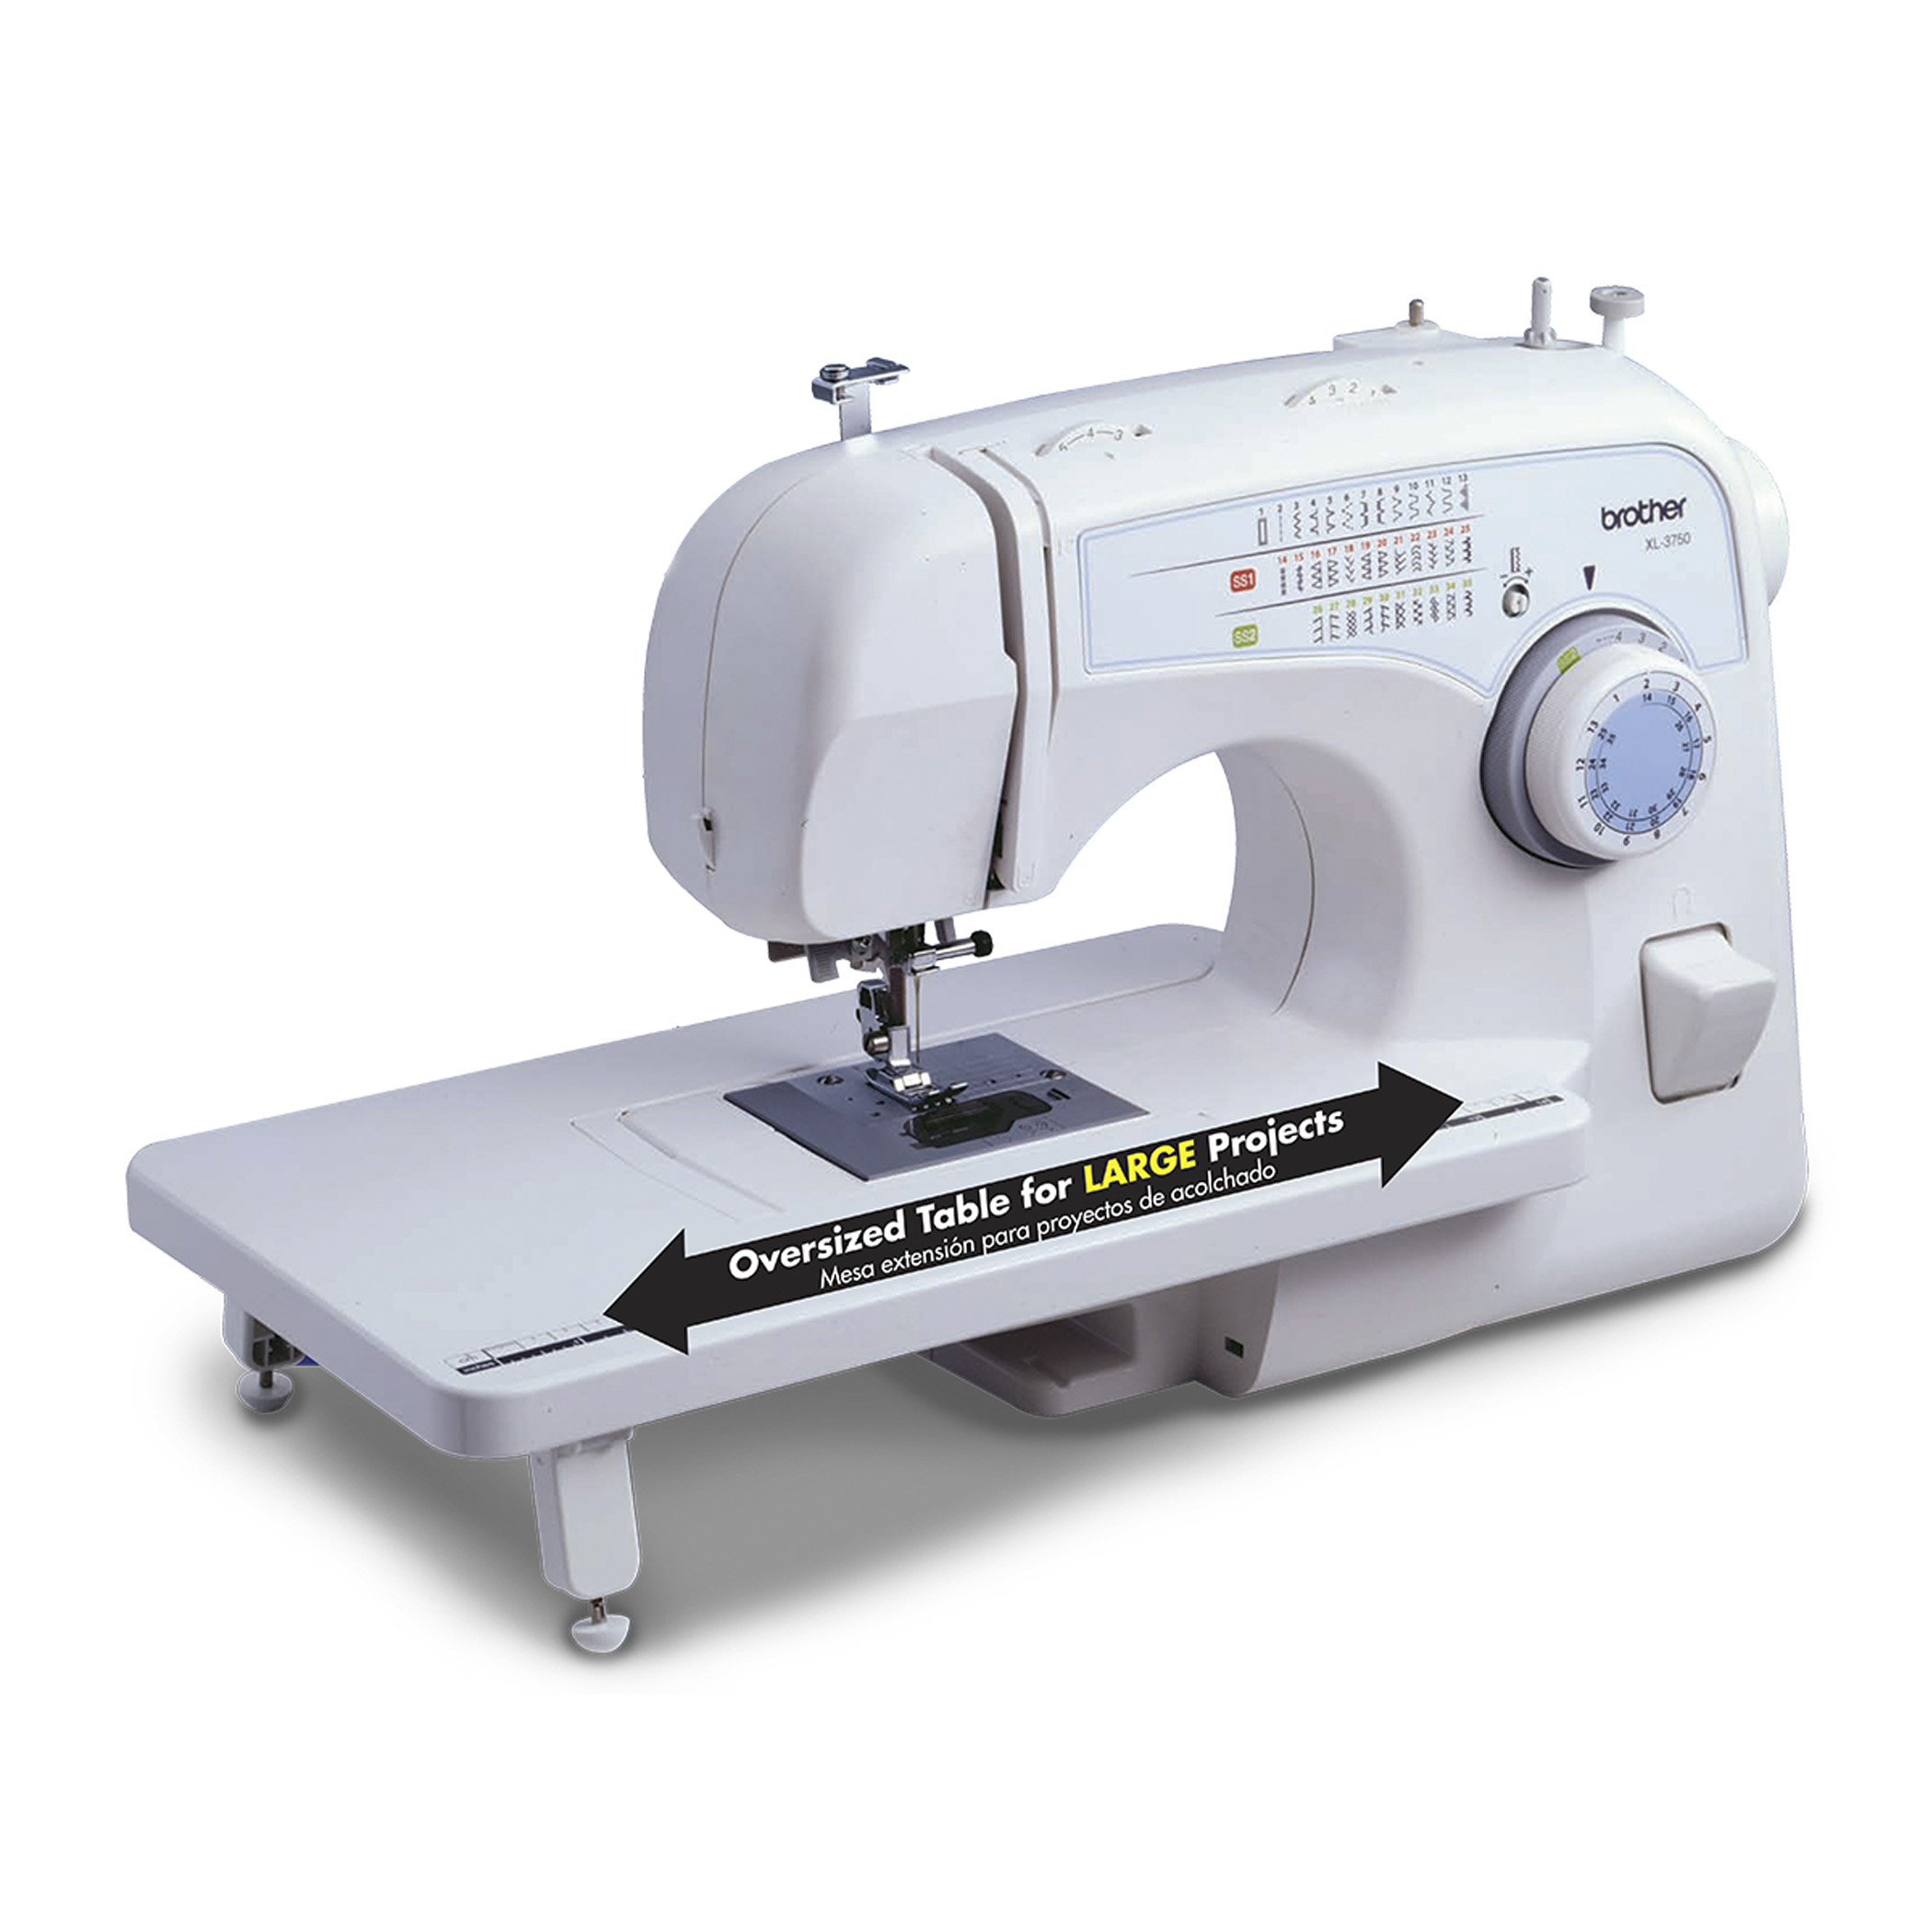 Brother Free Arm Sewing Machine XL-3750, 1.0 CT - image 1 of 6